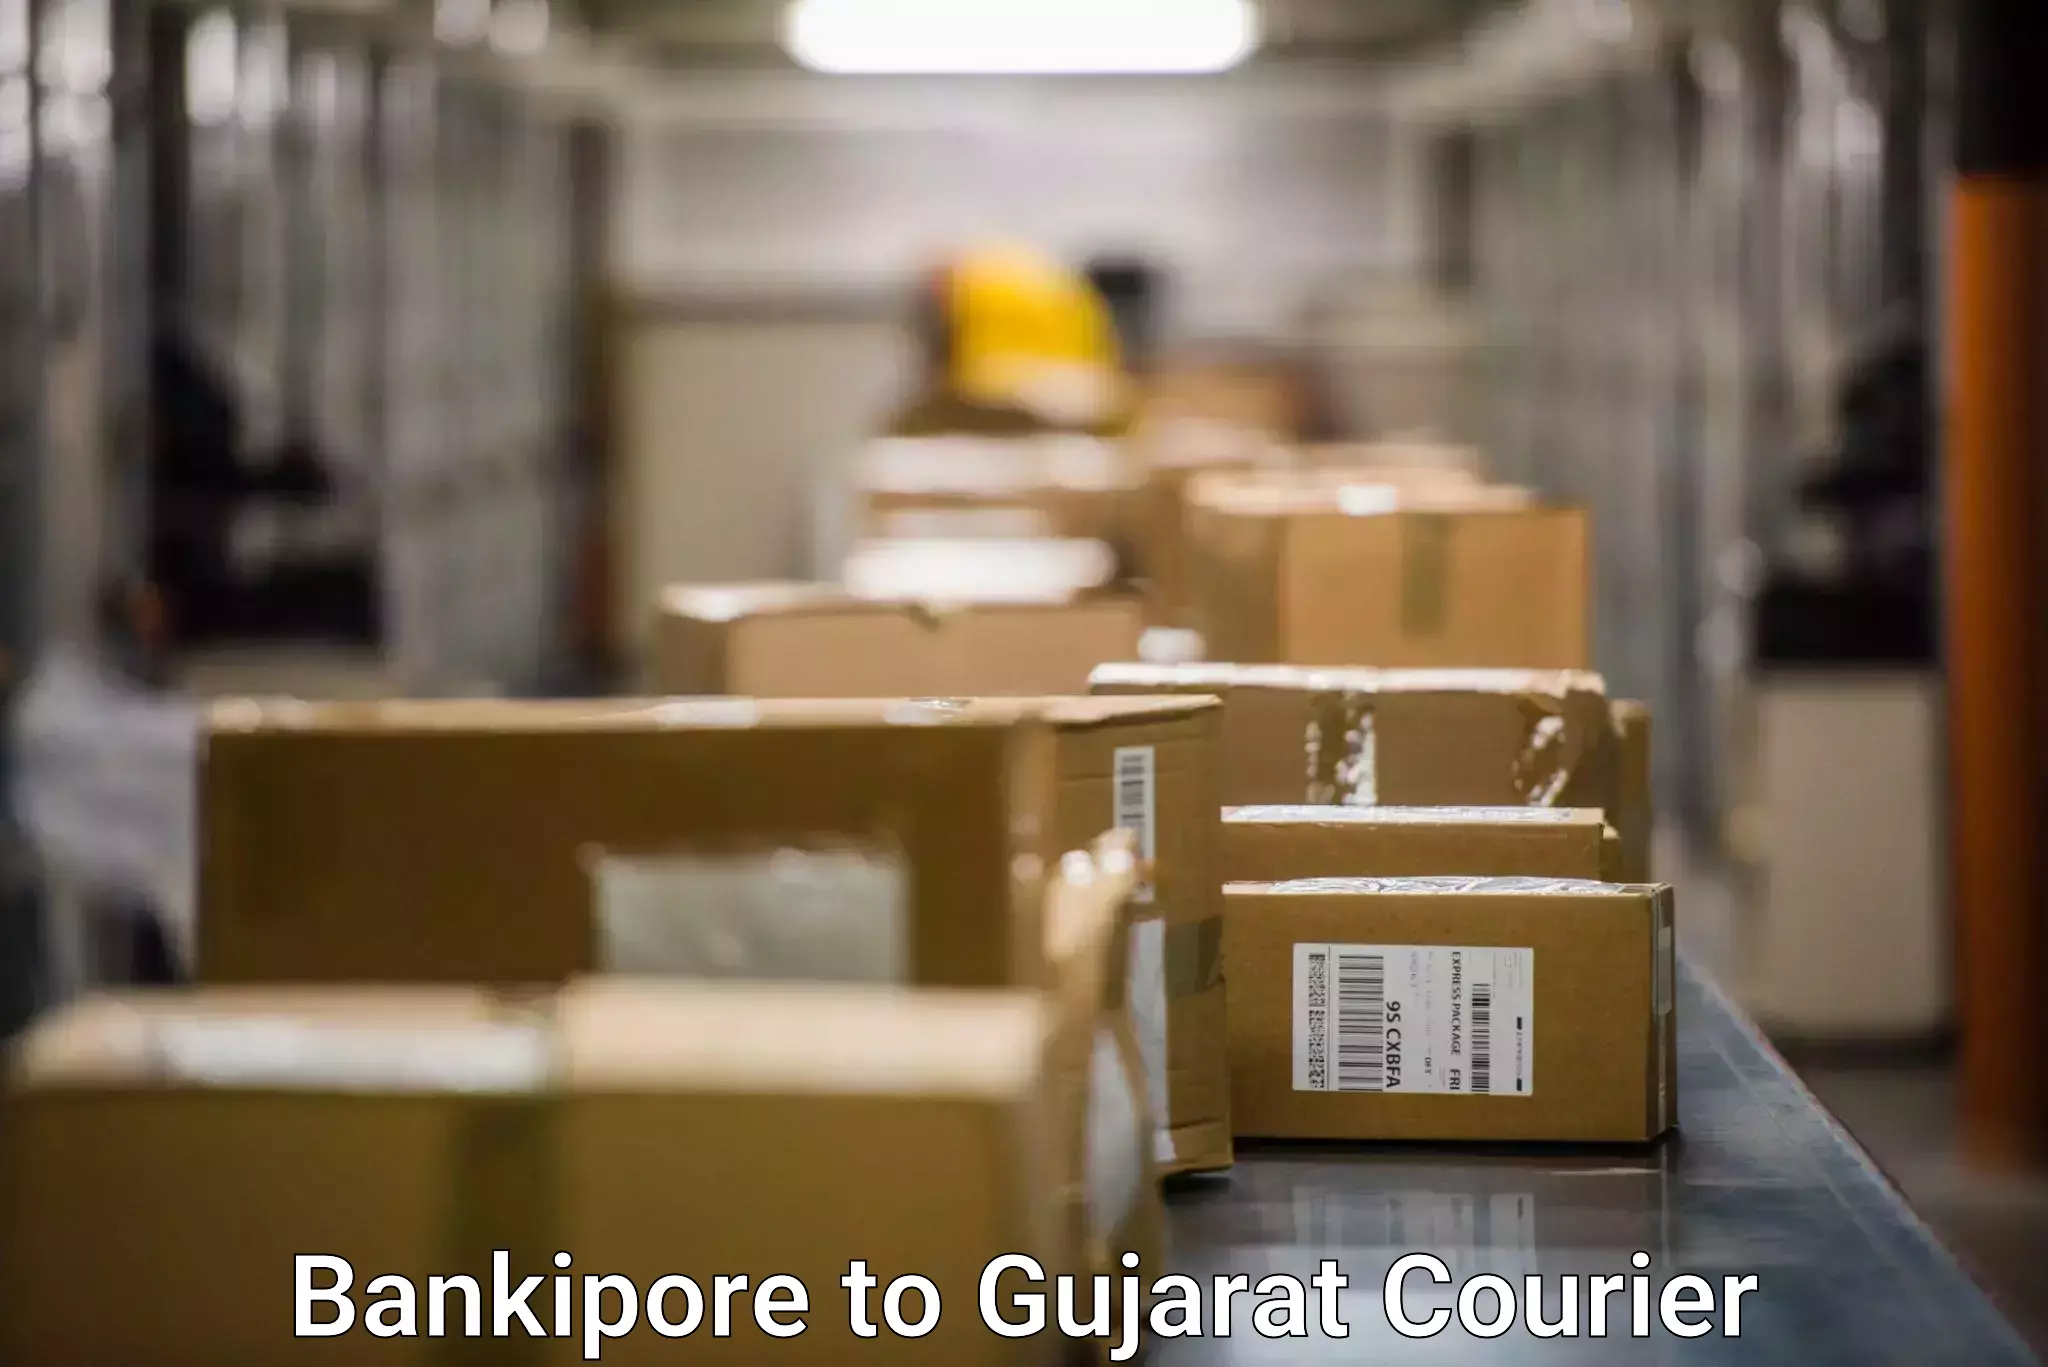 Business delivery service Bankipore to IIIT Surat